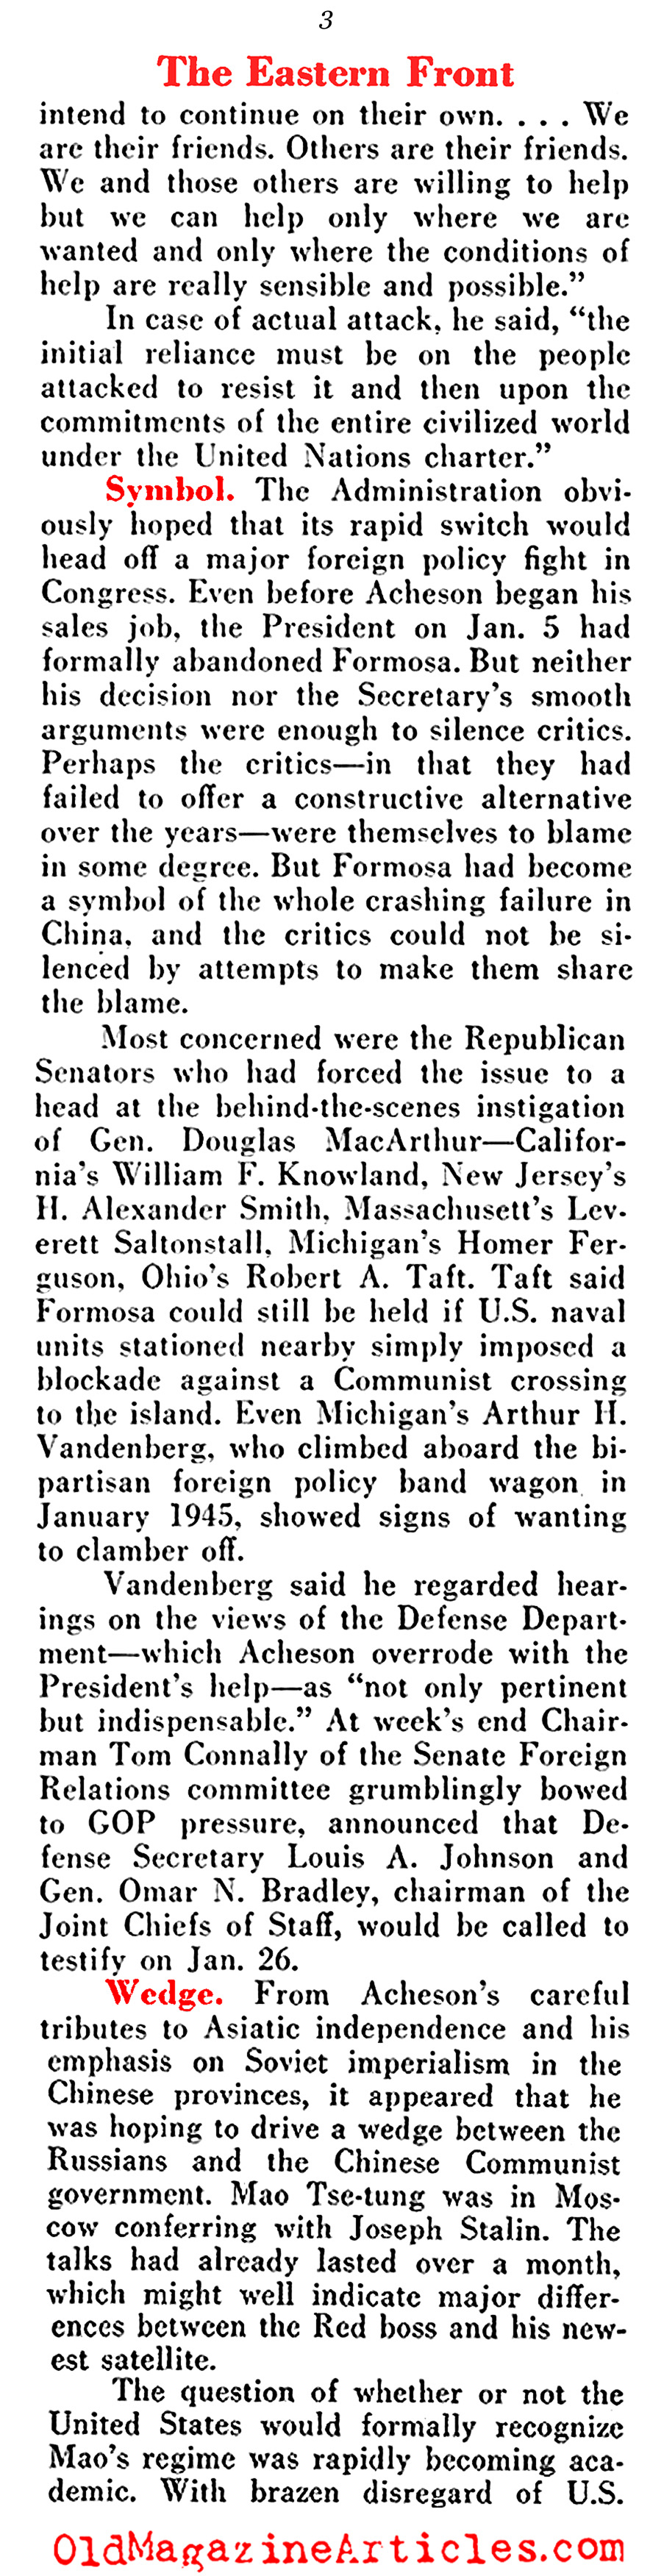 A Rift in the Containment Policy (Pathfinder Magazine, 1950)